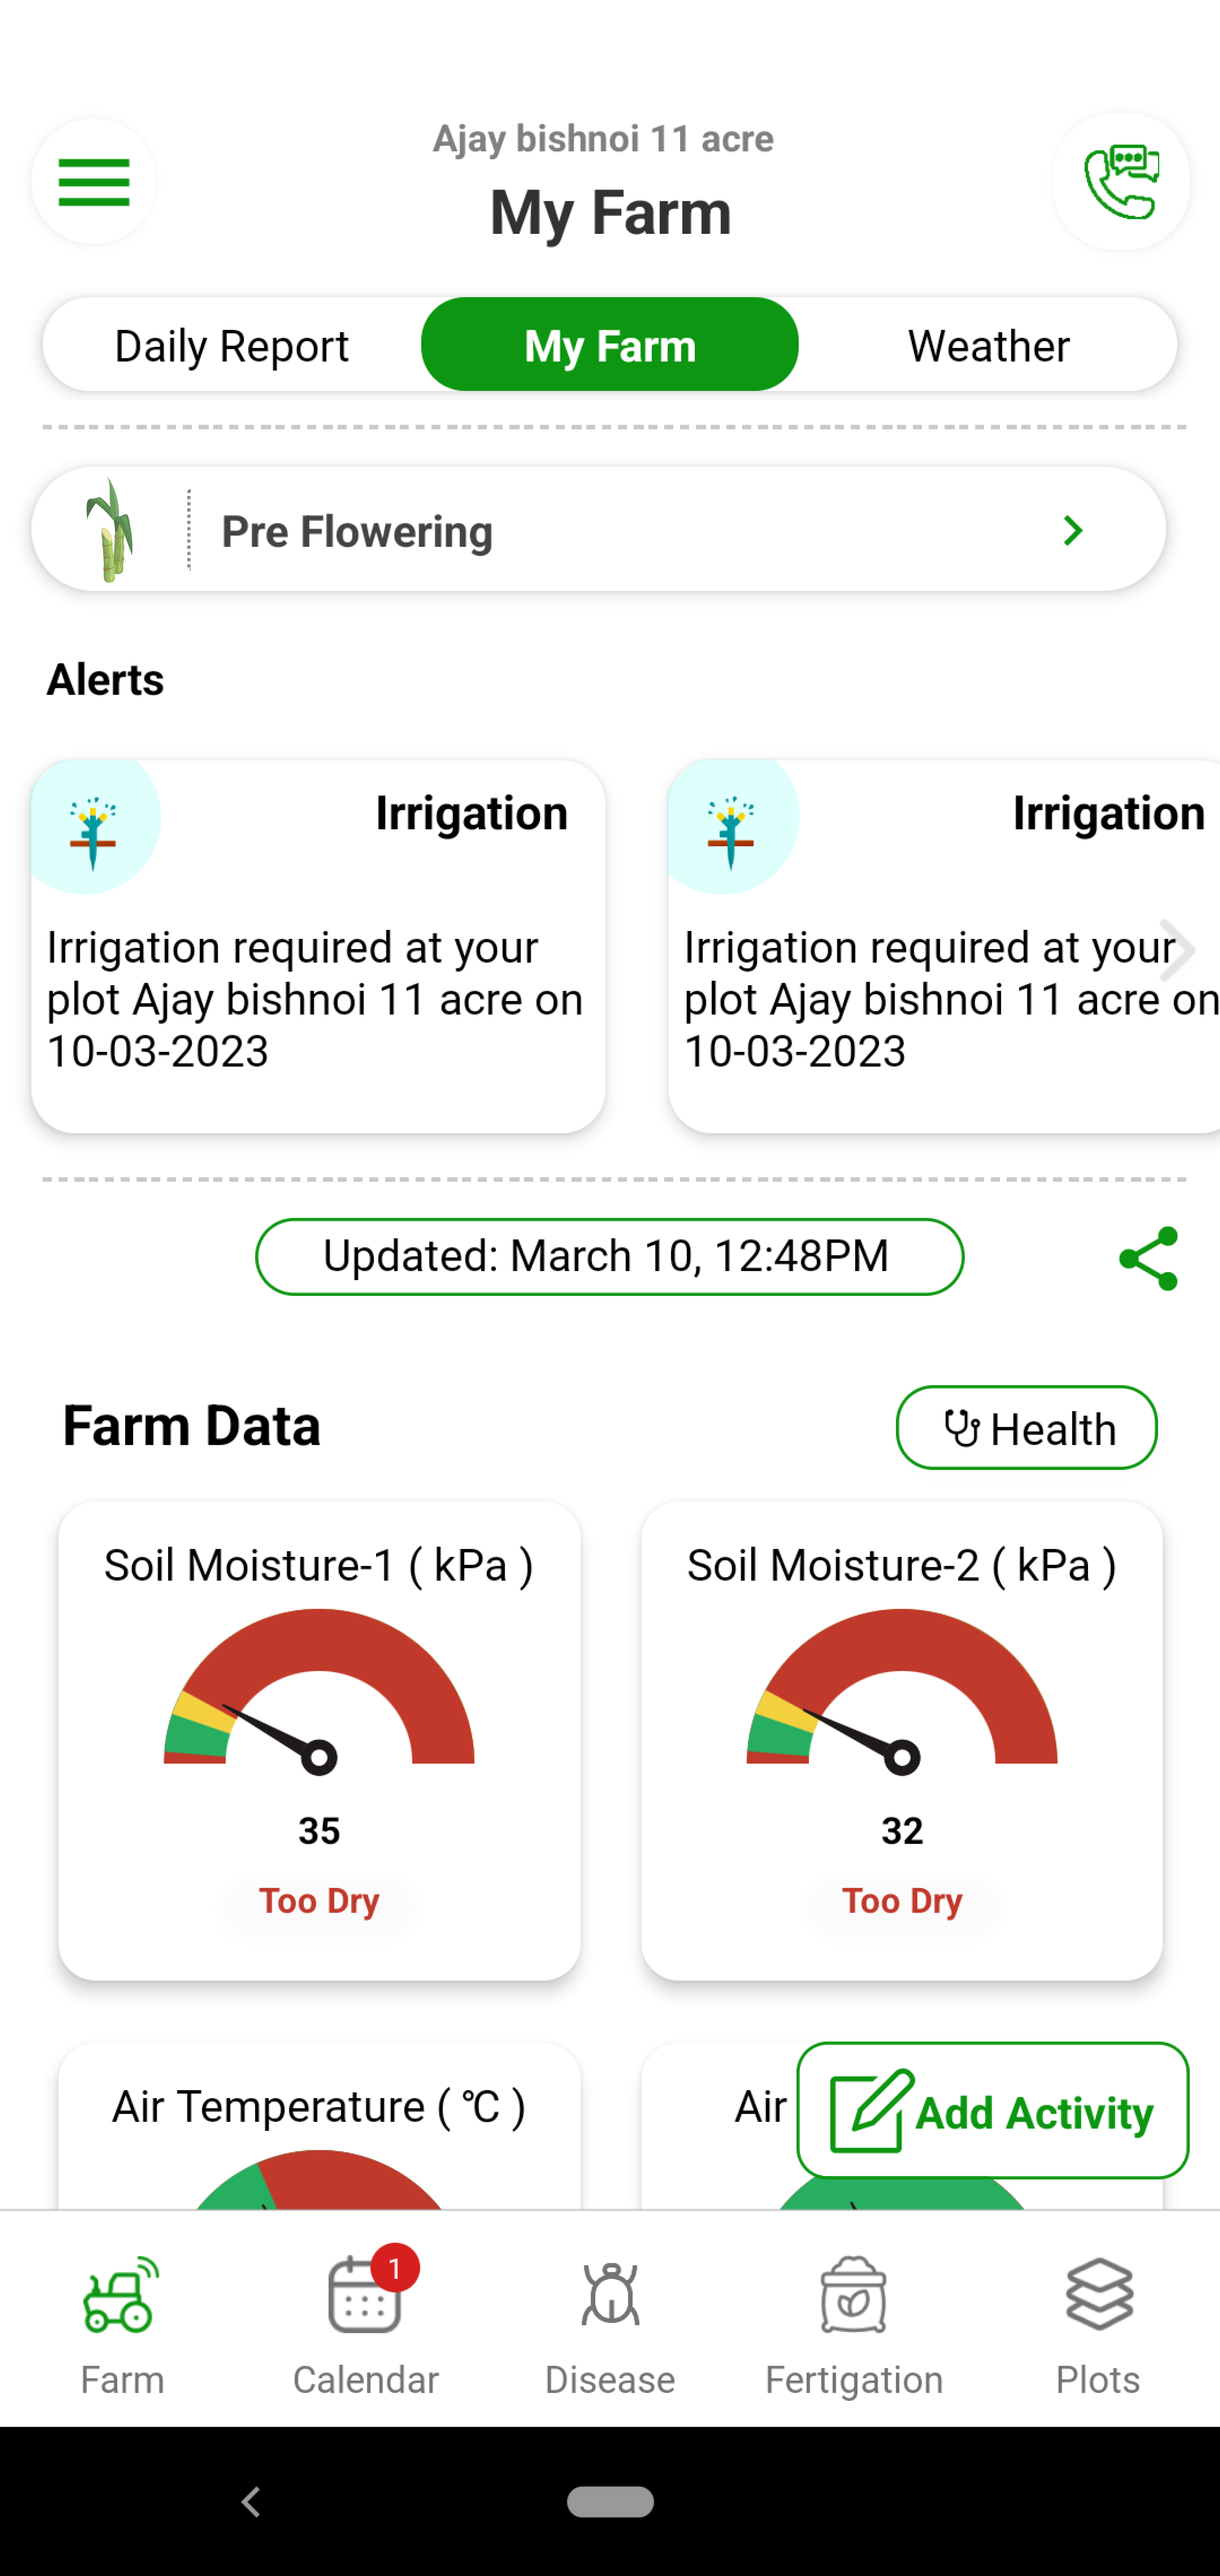 Irrigation is one of the important practices in Sugarcane growing. Under irrigation can hamper the cane size and quality. Over irrigation leads to wilting in the plants and less sugar. Sugarcane’s water requirements vary based on soil type and stage. With Fyllo’s device containing soil moisture and soil temperature sensor and intelligent software, you get alerts on how much water to provide to the crop. You can also see and visualize evapotranspiration (Etc) values of the crop. You can perfectly manage the water requirements to get the perfect size, color and sugar.